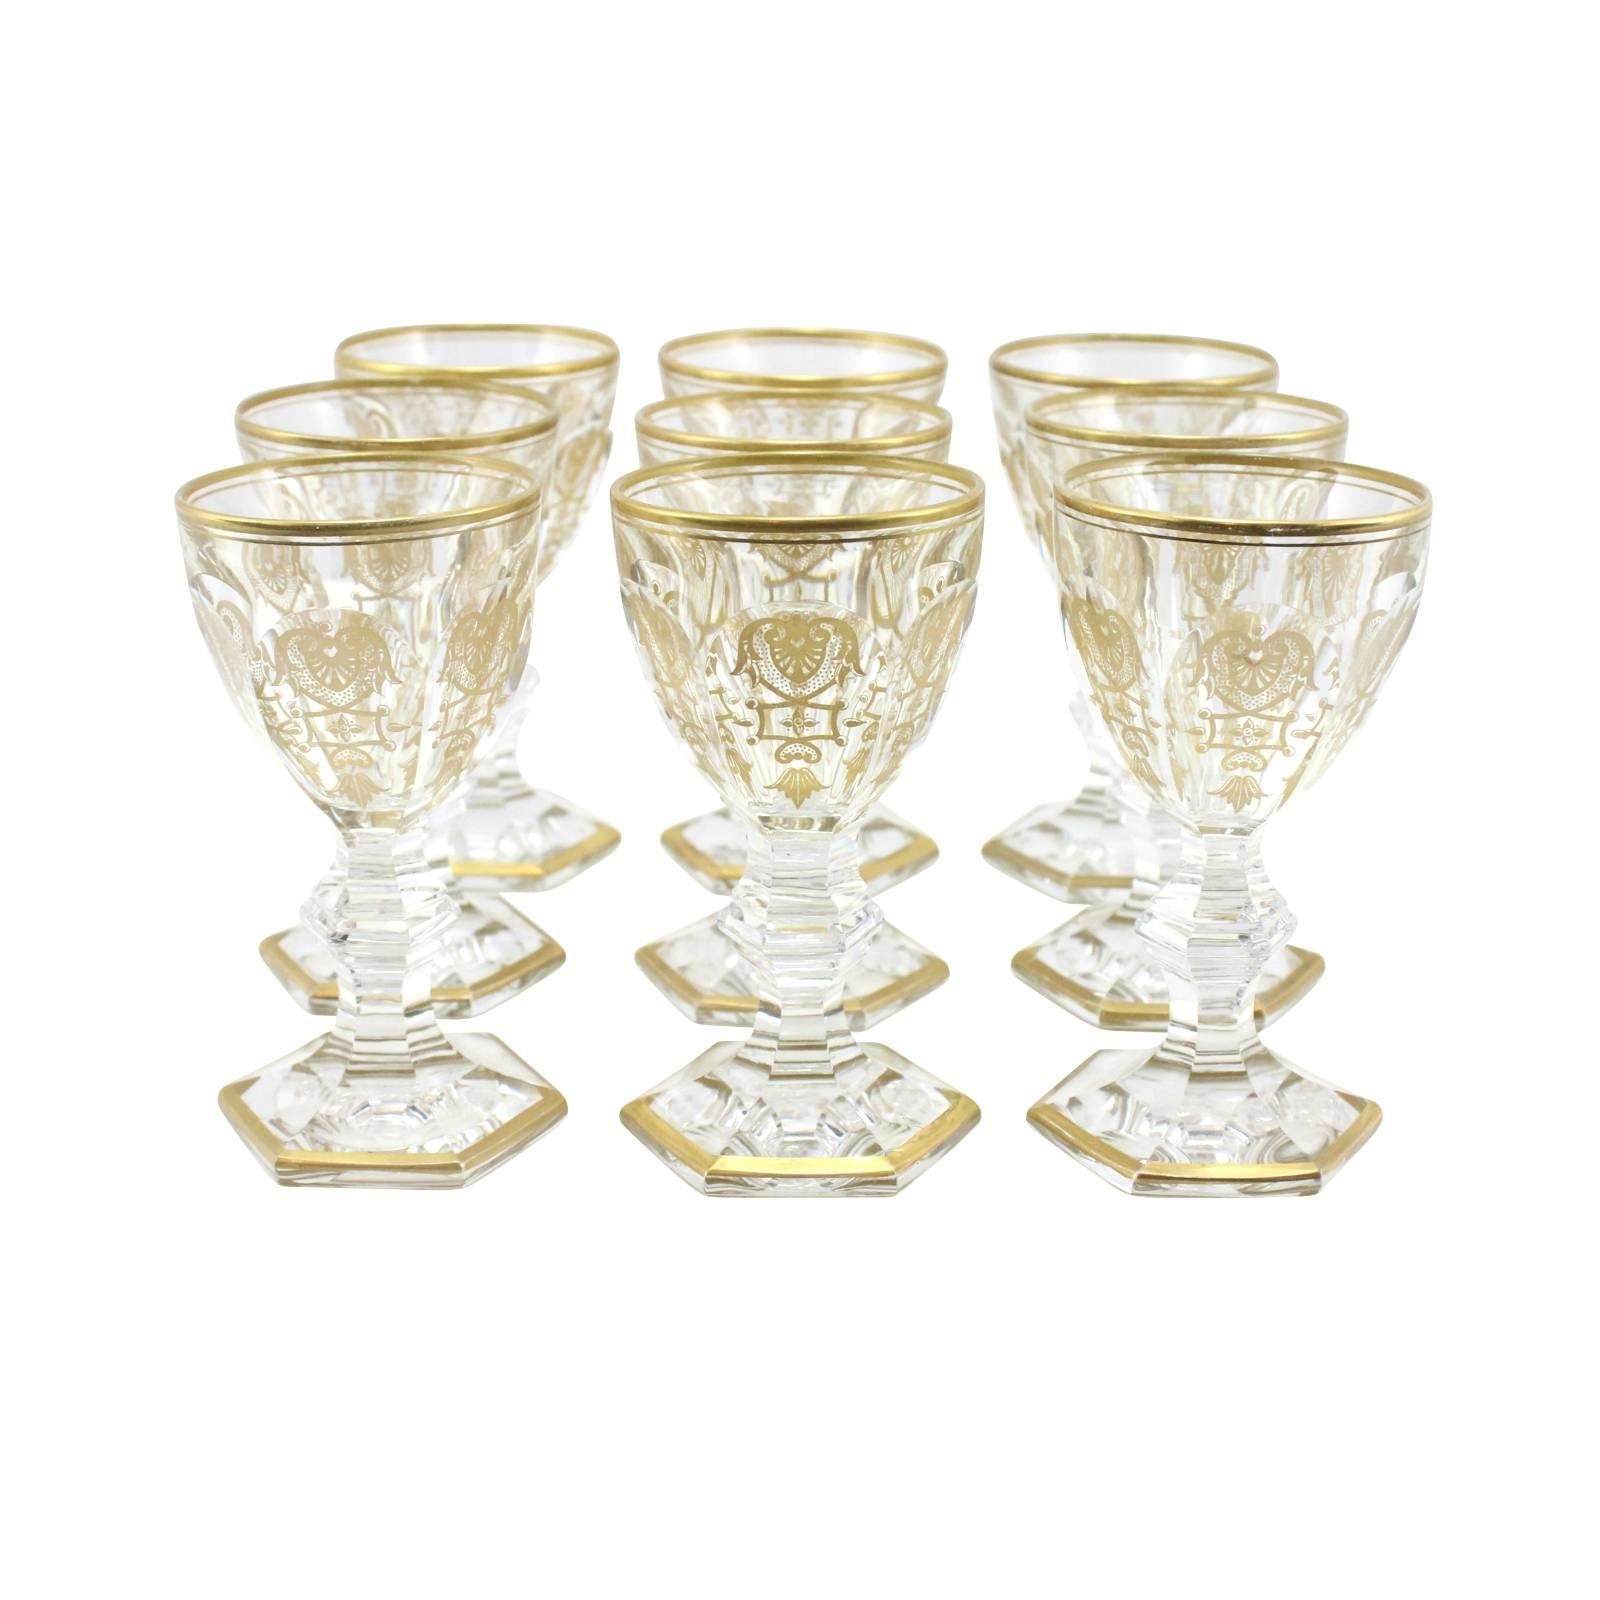 20th Century 54-Piece Set of Baccarat Crystal in the Empire Pattern